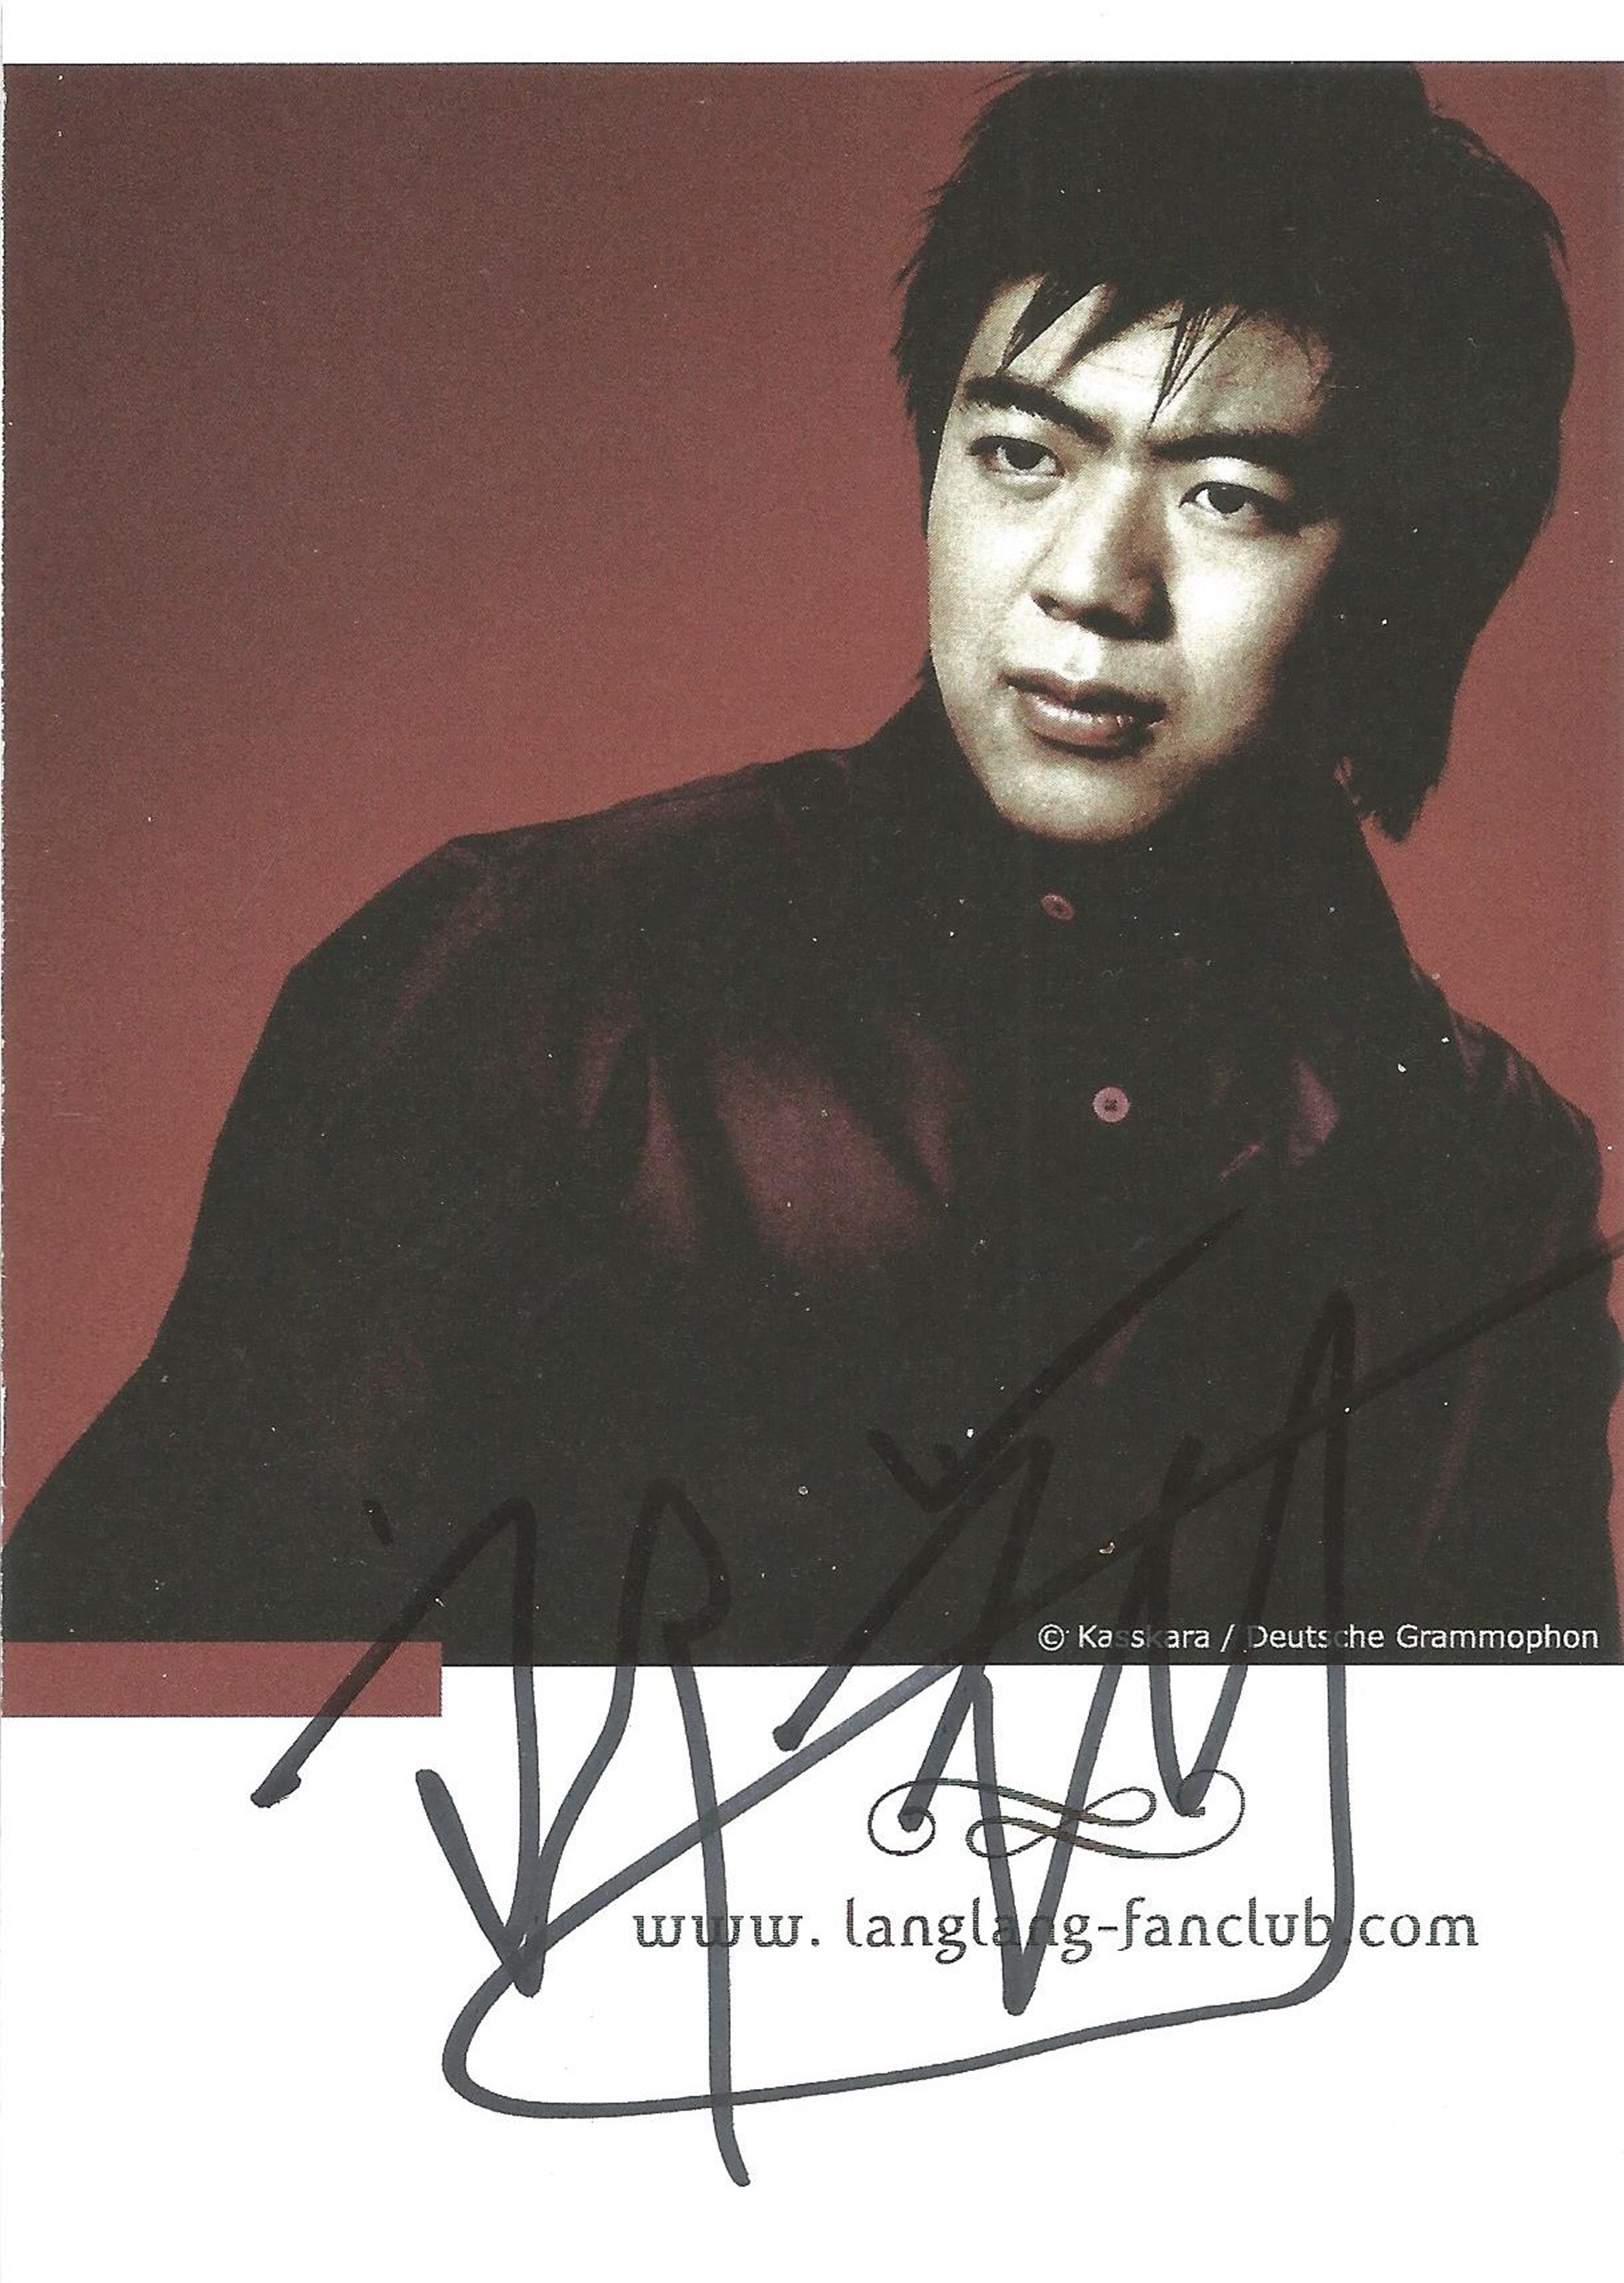 Lang Lang signed 6x4 colour photo. Lang Lang is a Chinese concert pianist who has performed with